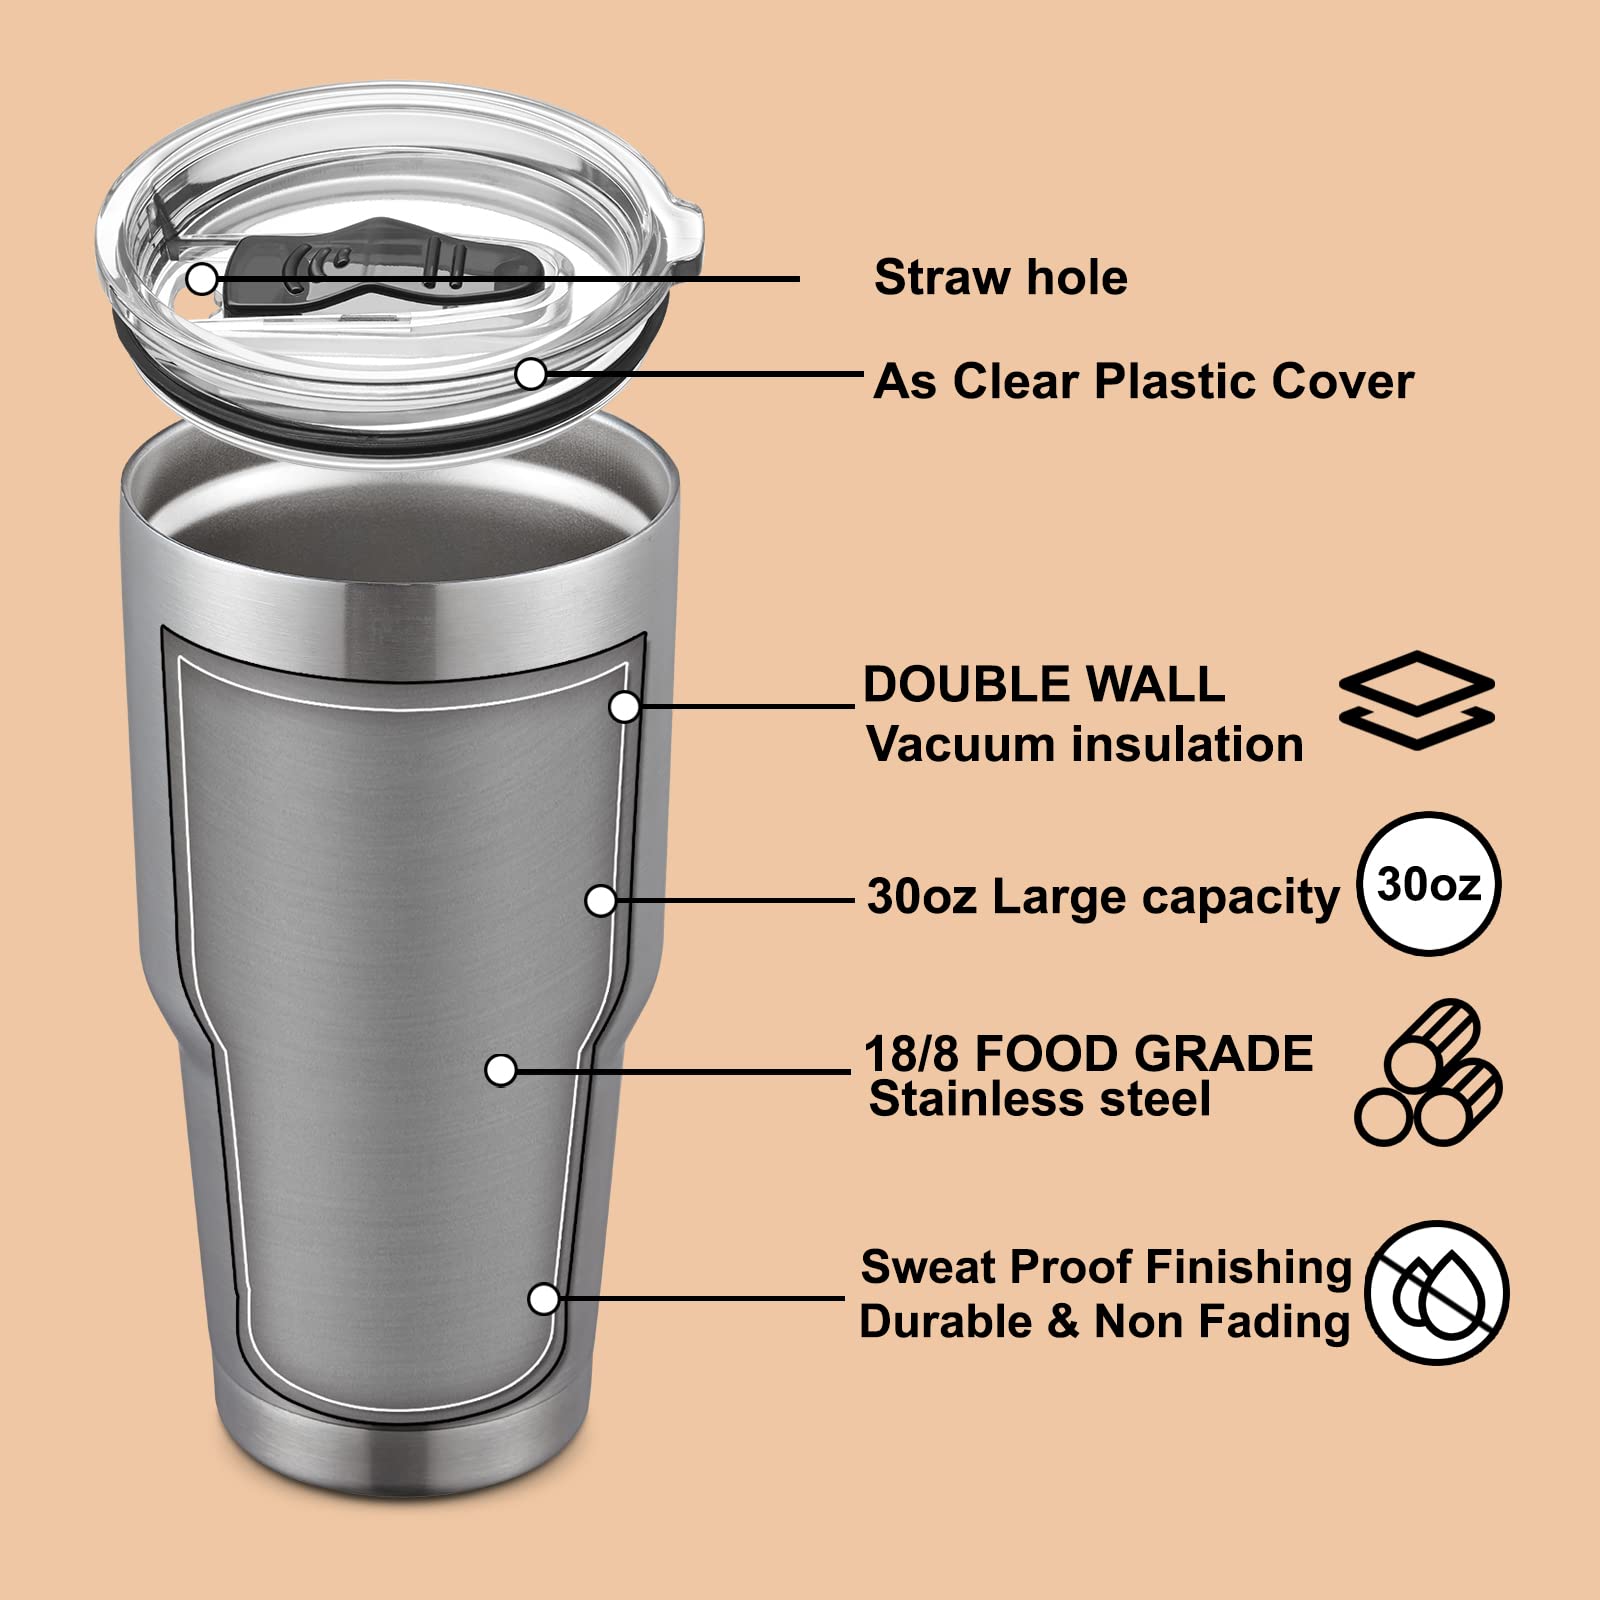 COMOOO 30 oz Stainless Steel Tumbler Bulk with Lid and Straw Insulated Tumbler Coffee Cup Durable Double Wall Vacuum Travel Coffee Mug Thermal for Hot and Cold Drinks (Silver, 8 Pack)